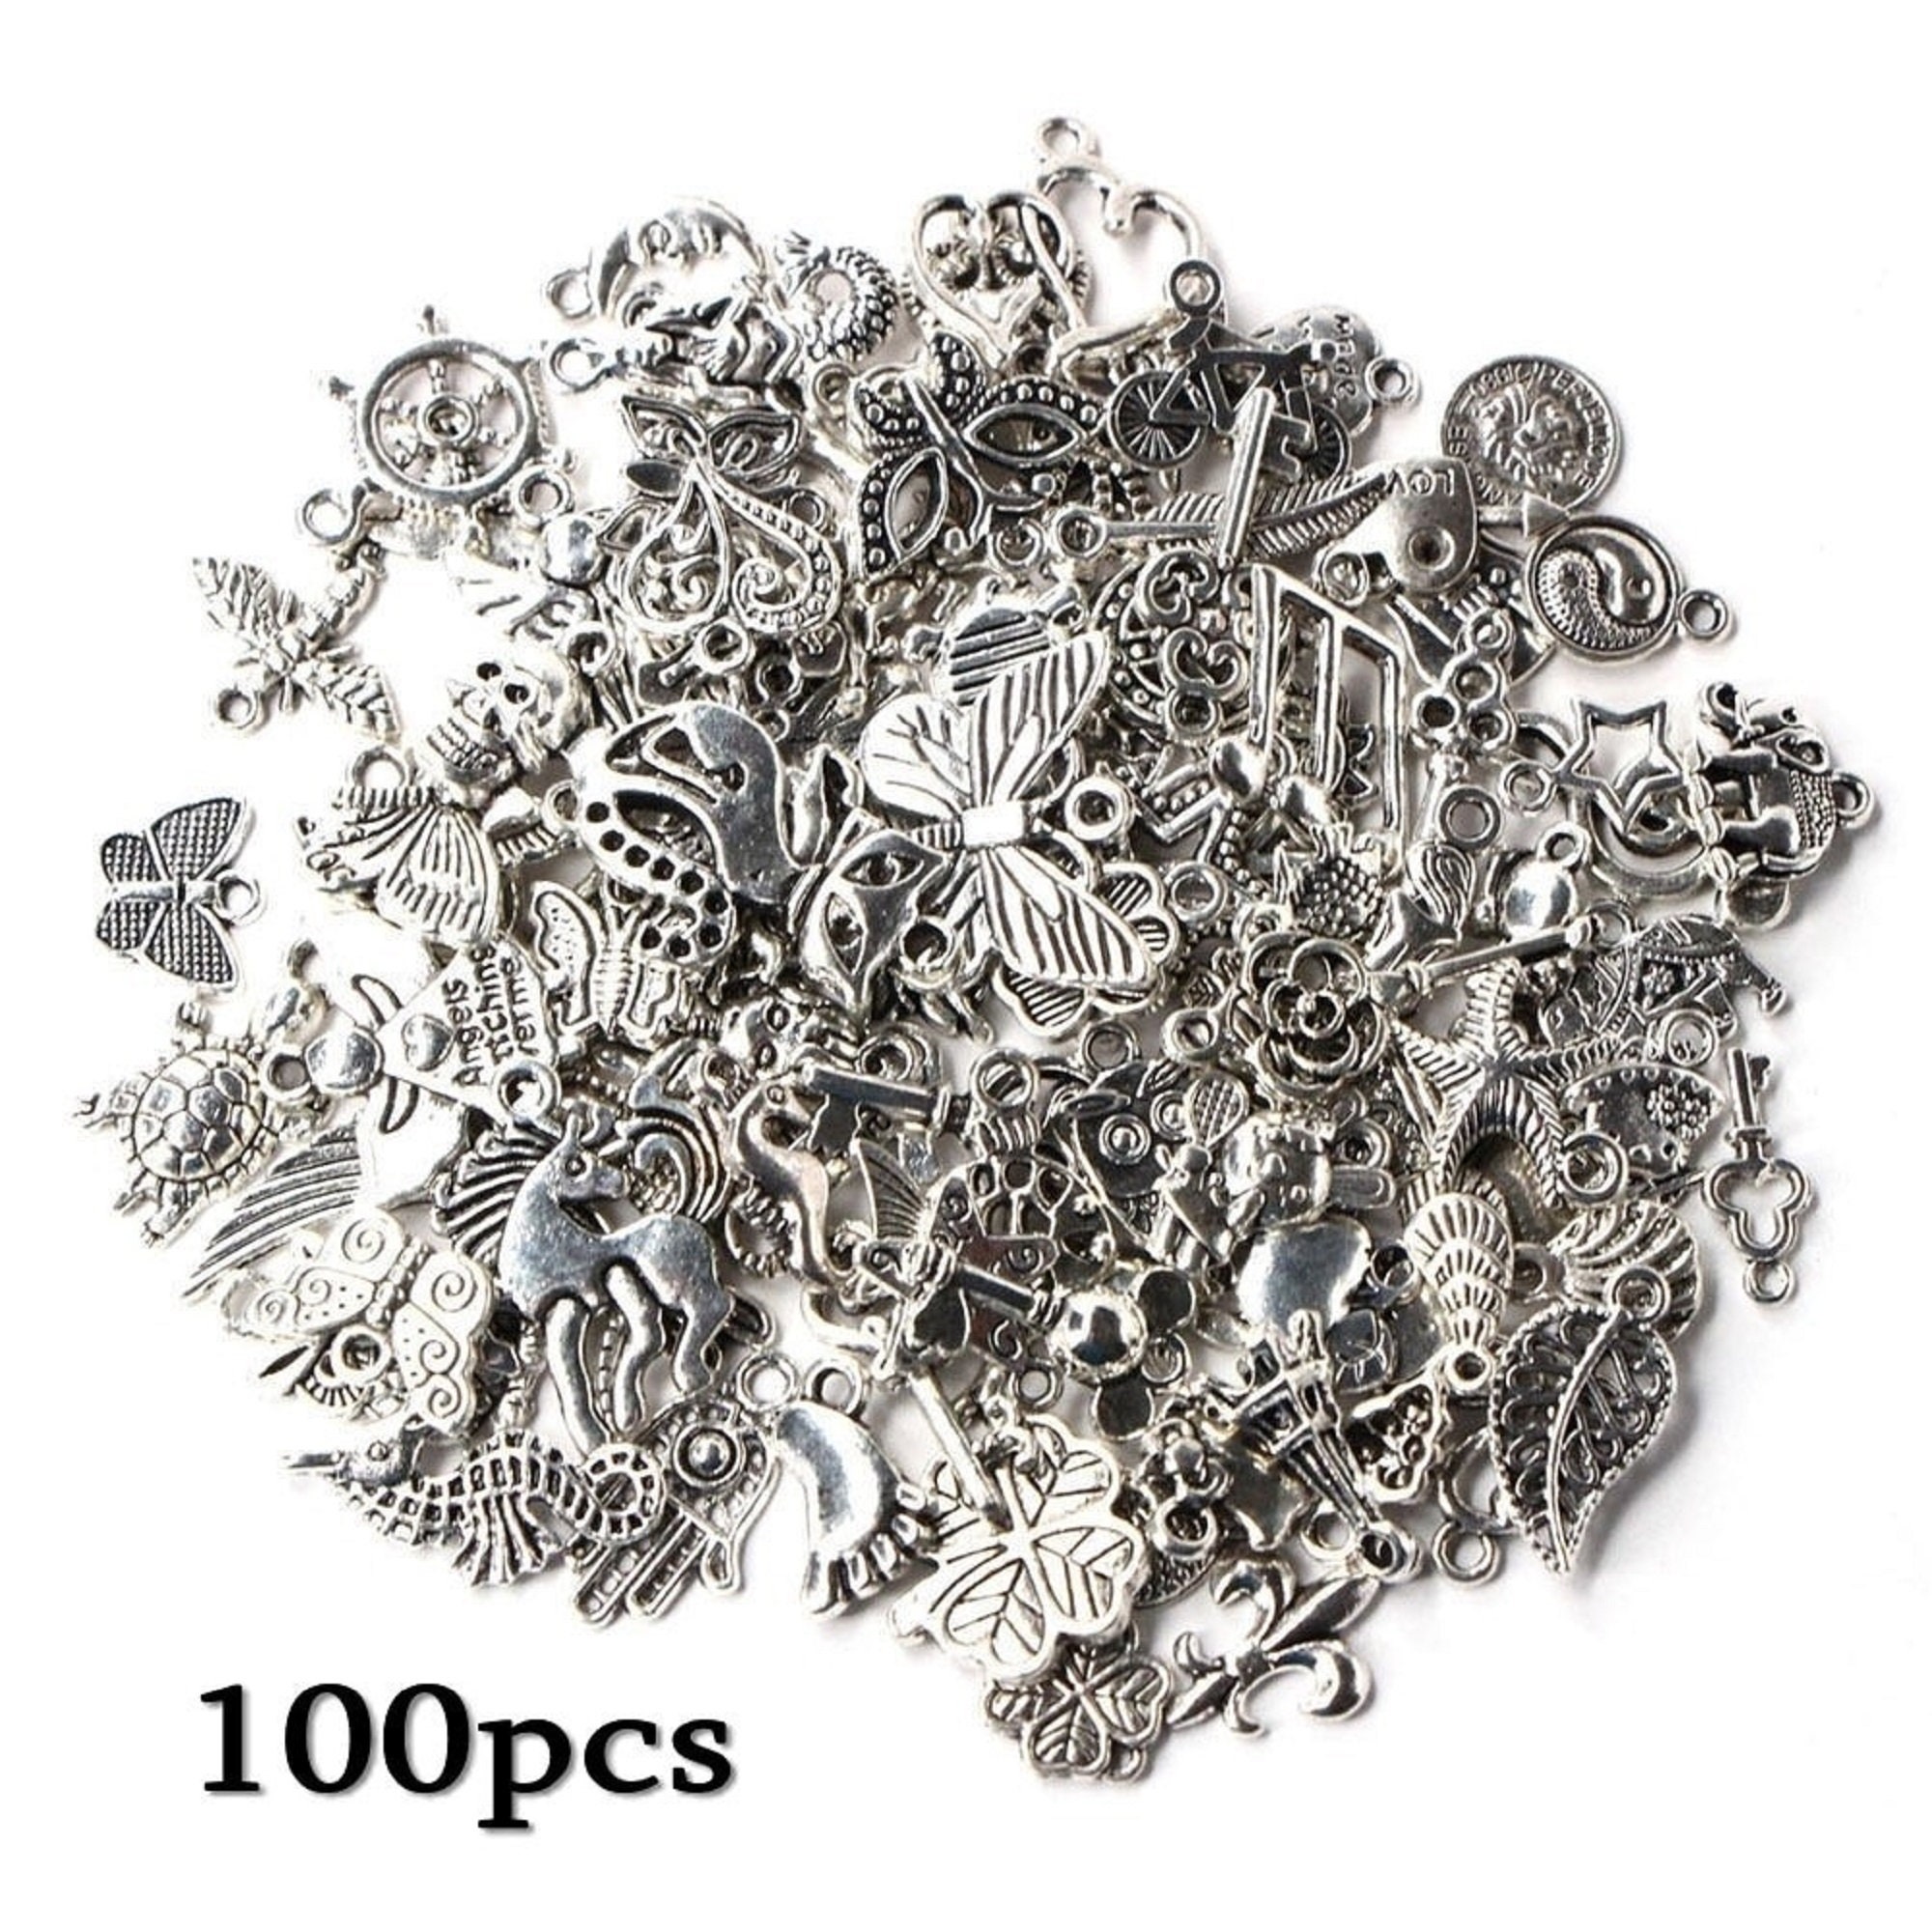 400 Pcs Silver Charms for Jewelry Making , Wholesale Bulk Lots Tiny Assorted Mixed Tibetan Silver Metal Pendants for DIY Necklace Bracelet Making